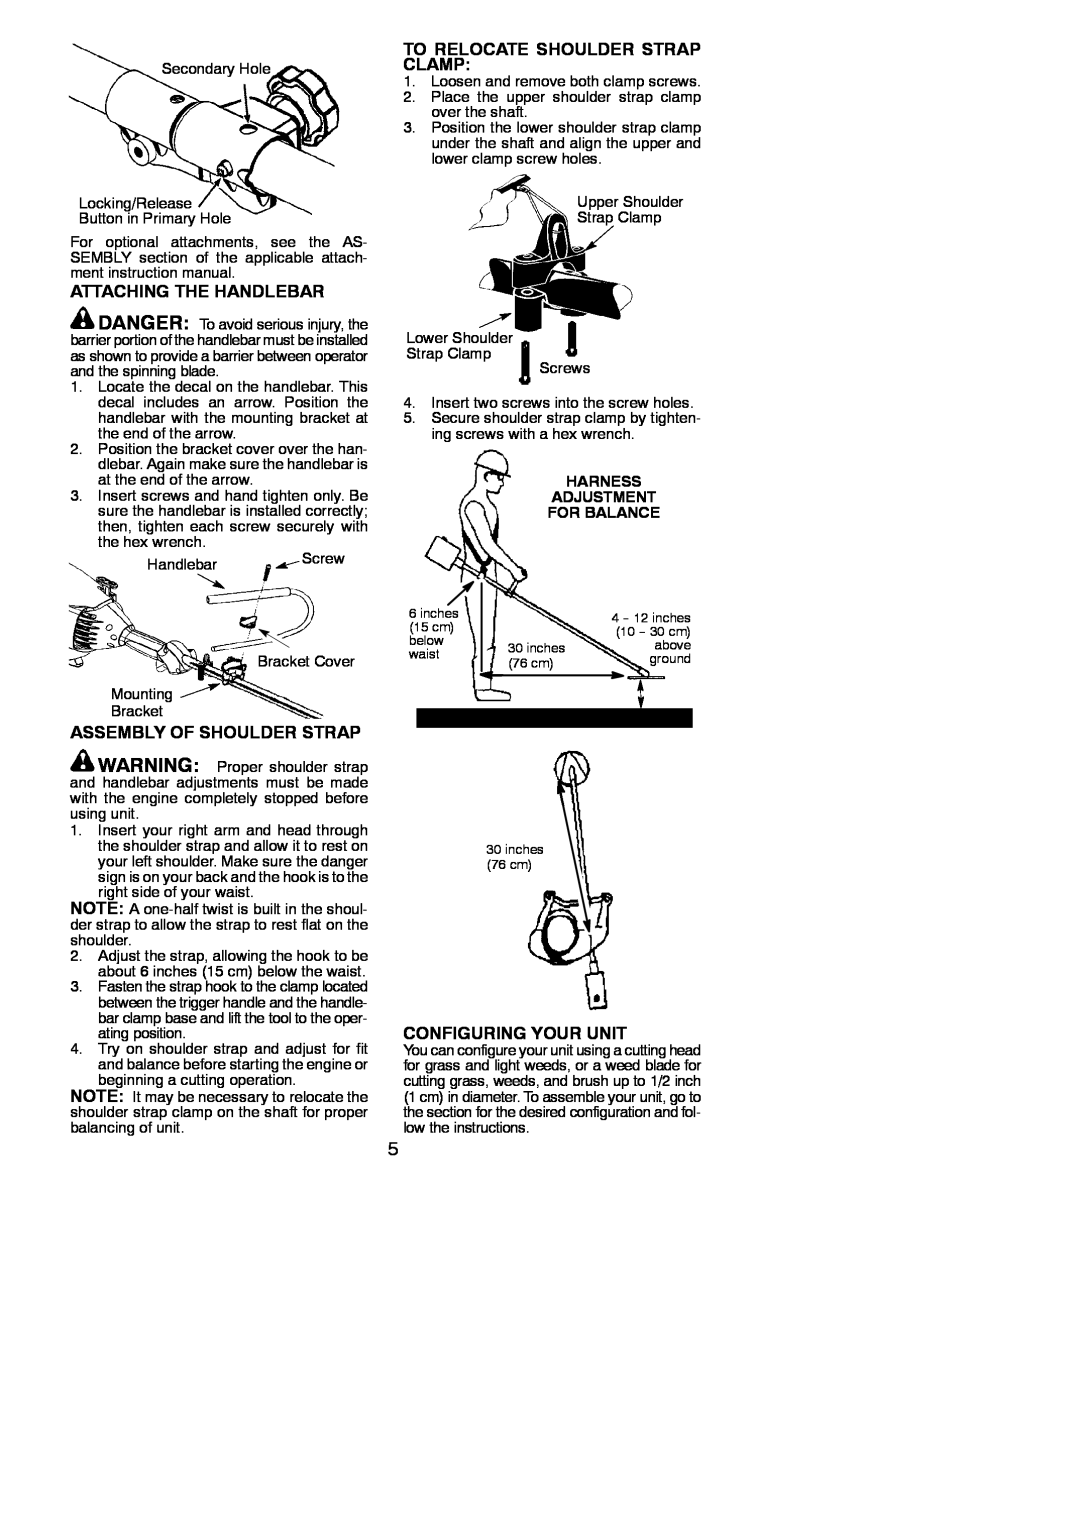 Poulan PP336 To Relocate Shoulder Strap Clamp, Attaching The Handlebar, Assembly Of Shoulder Strap, Configuring Your Unit 